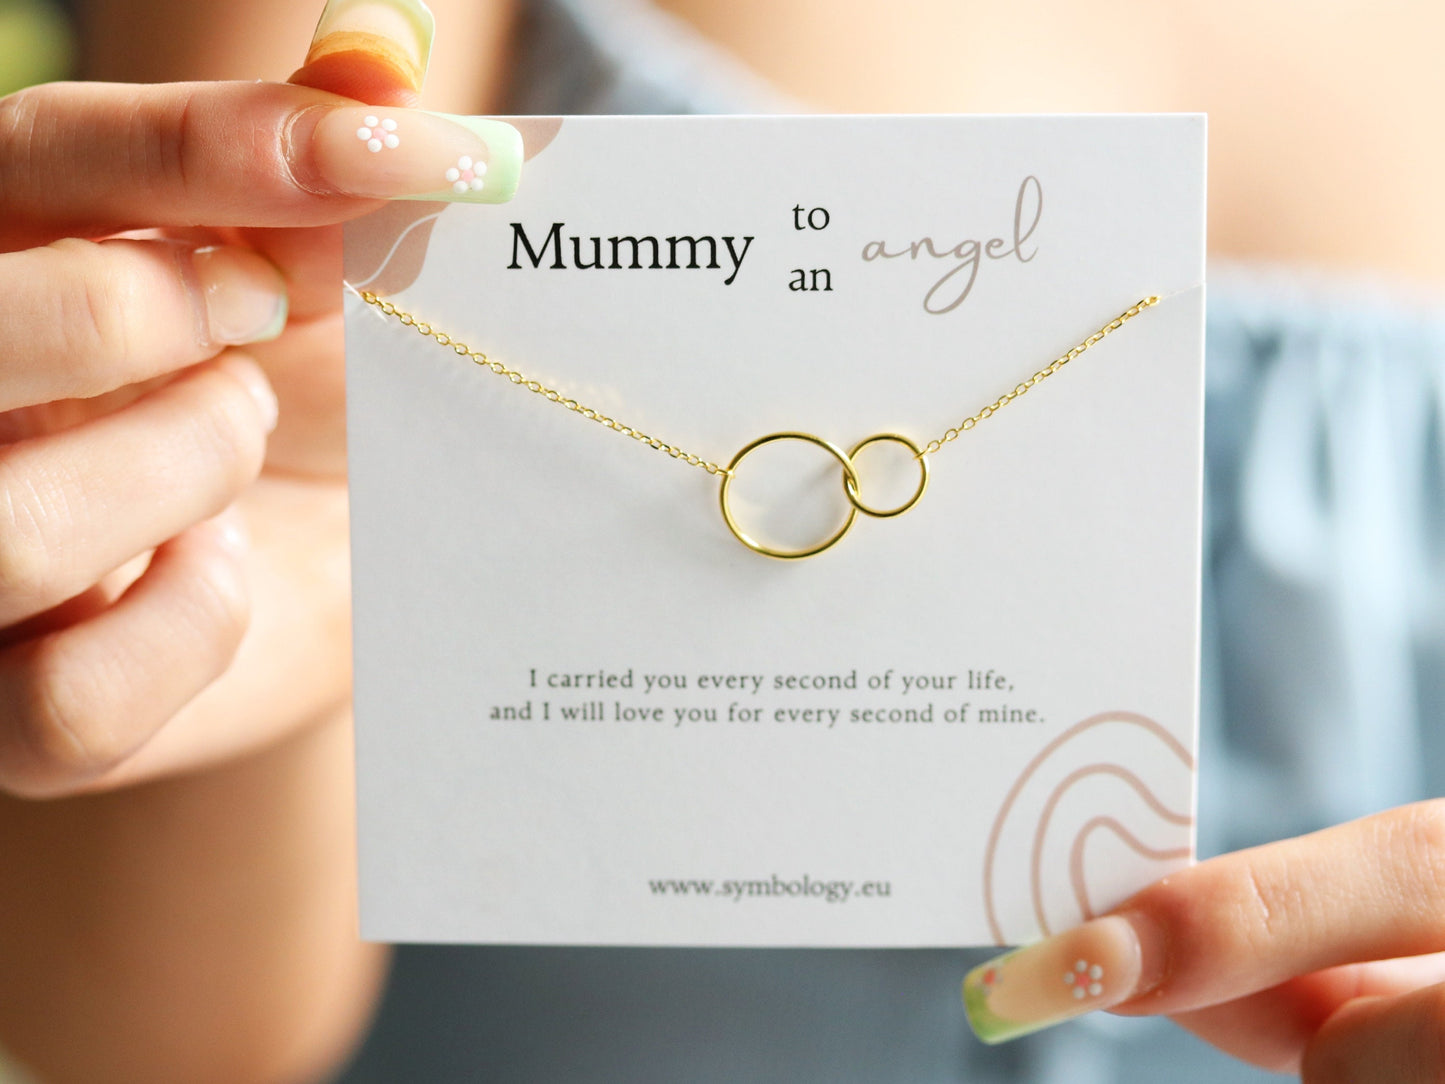 Miscarriage Necklace Gift for Her, Sterling Silver Interlinked Circle Stillborn Gift, Pregnancy Loss Bereavement Gift, Mama of an Angel